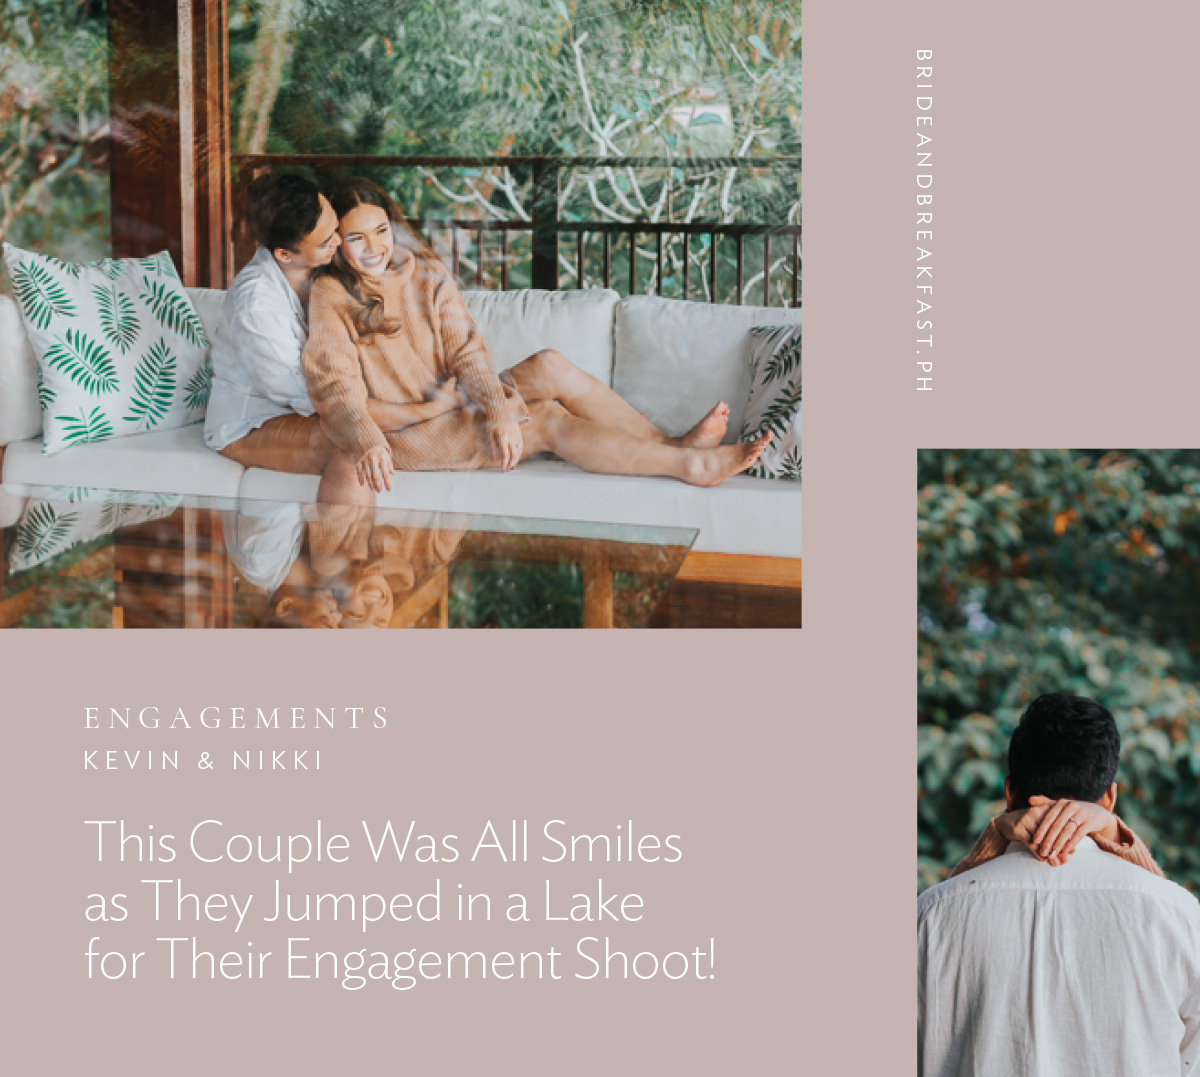 This Couple Was All Smiles as They Jumped in a Lake for Their Engagement Shoot!